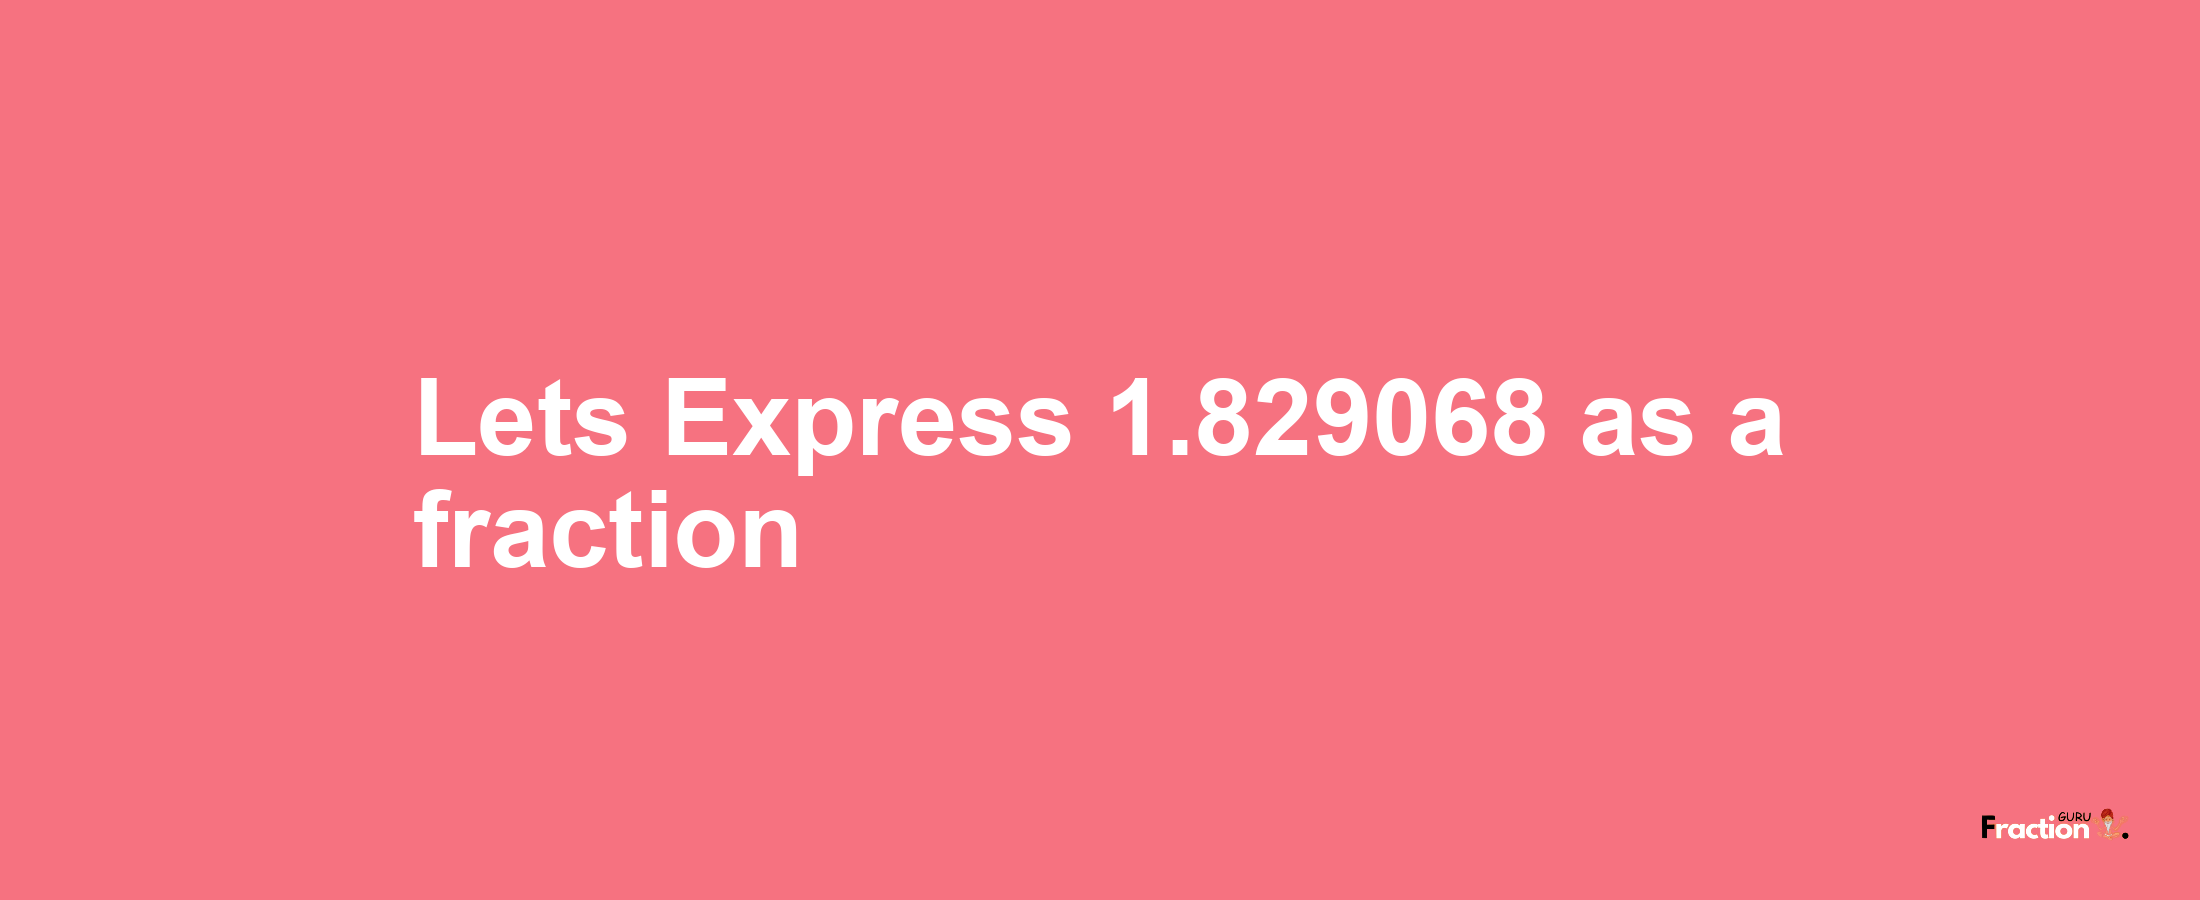 Lets Express 1.829068 as afraction